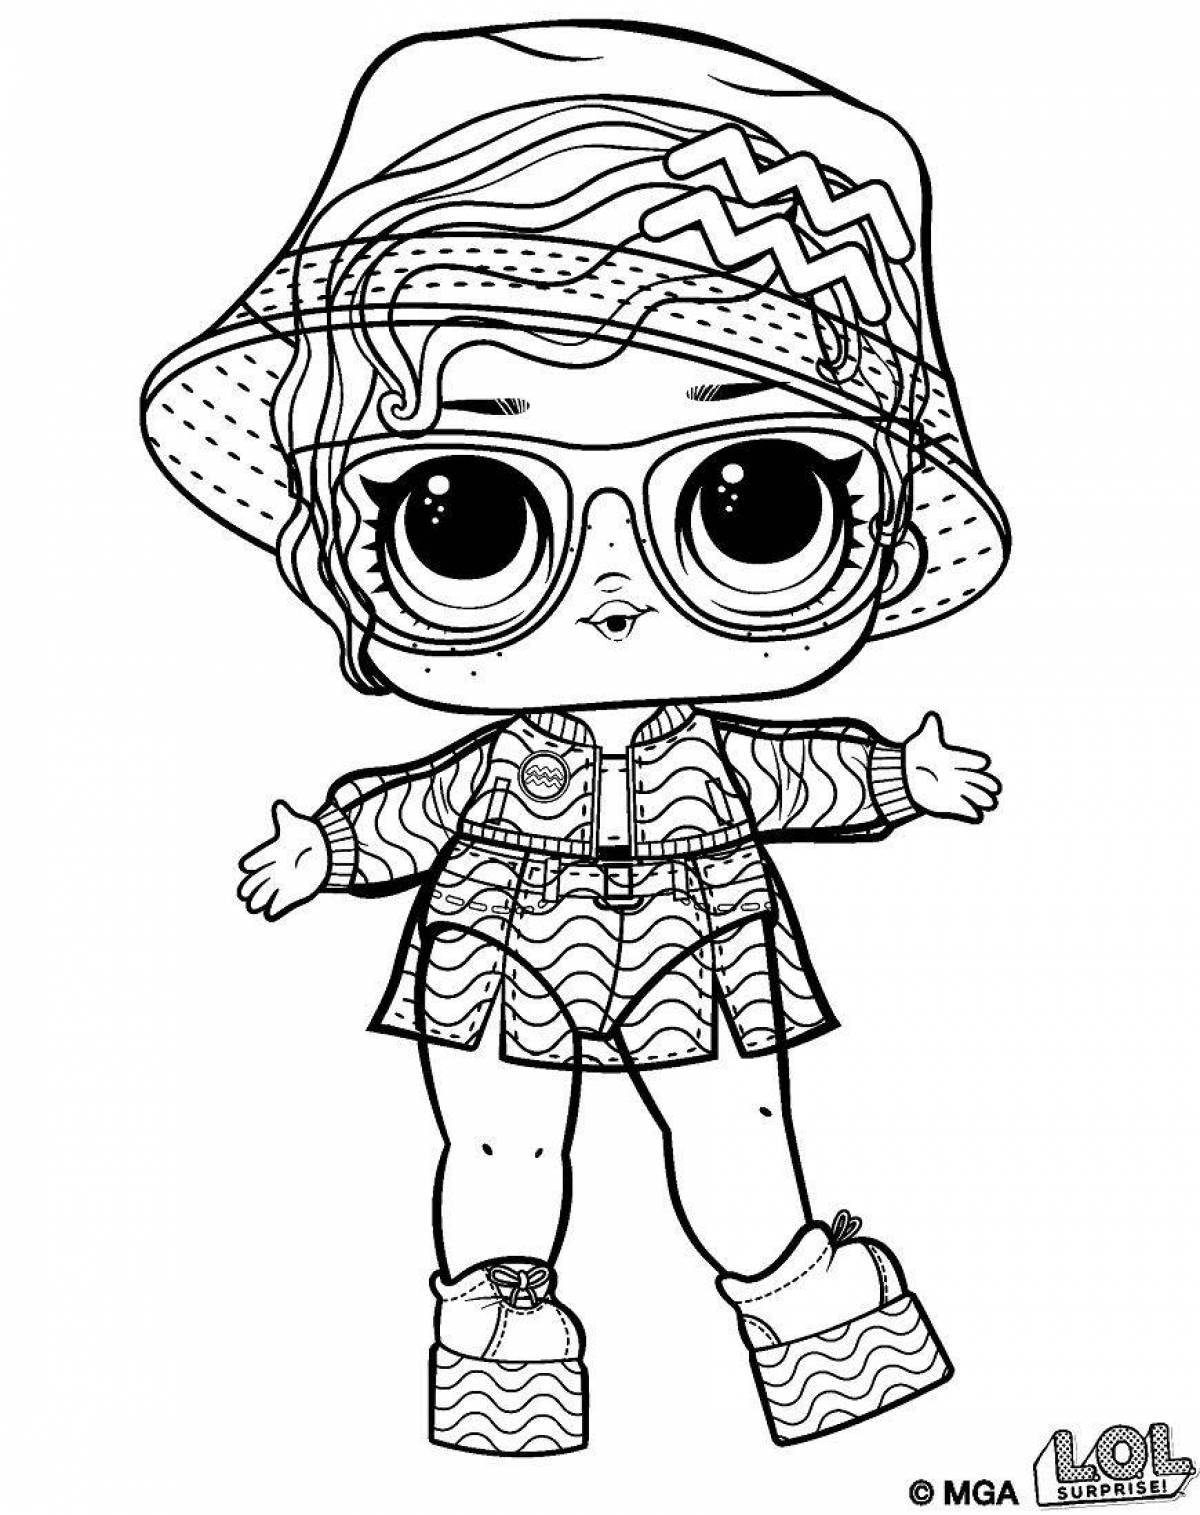 Color-fabulous coloring page lol doll